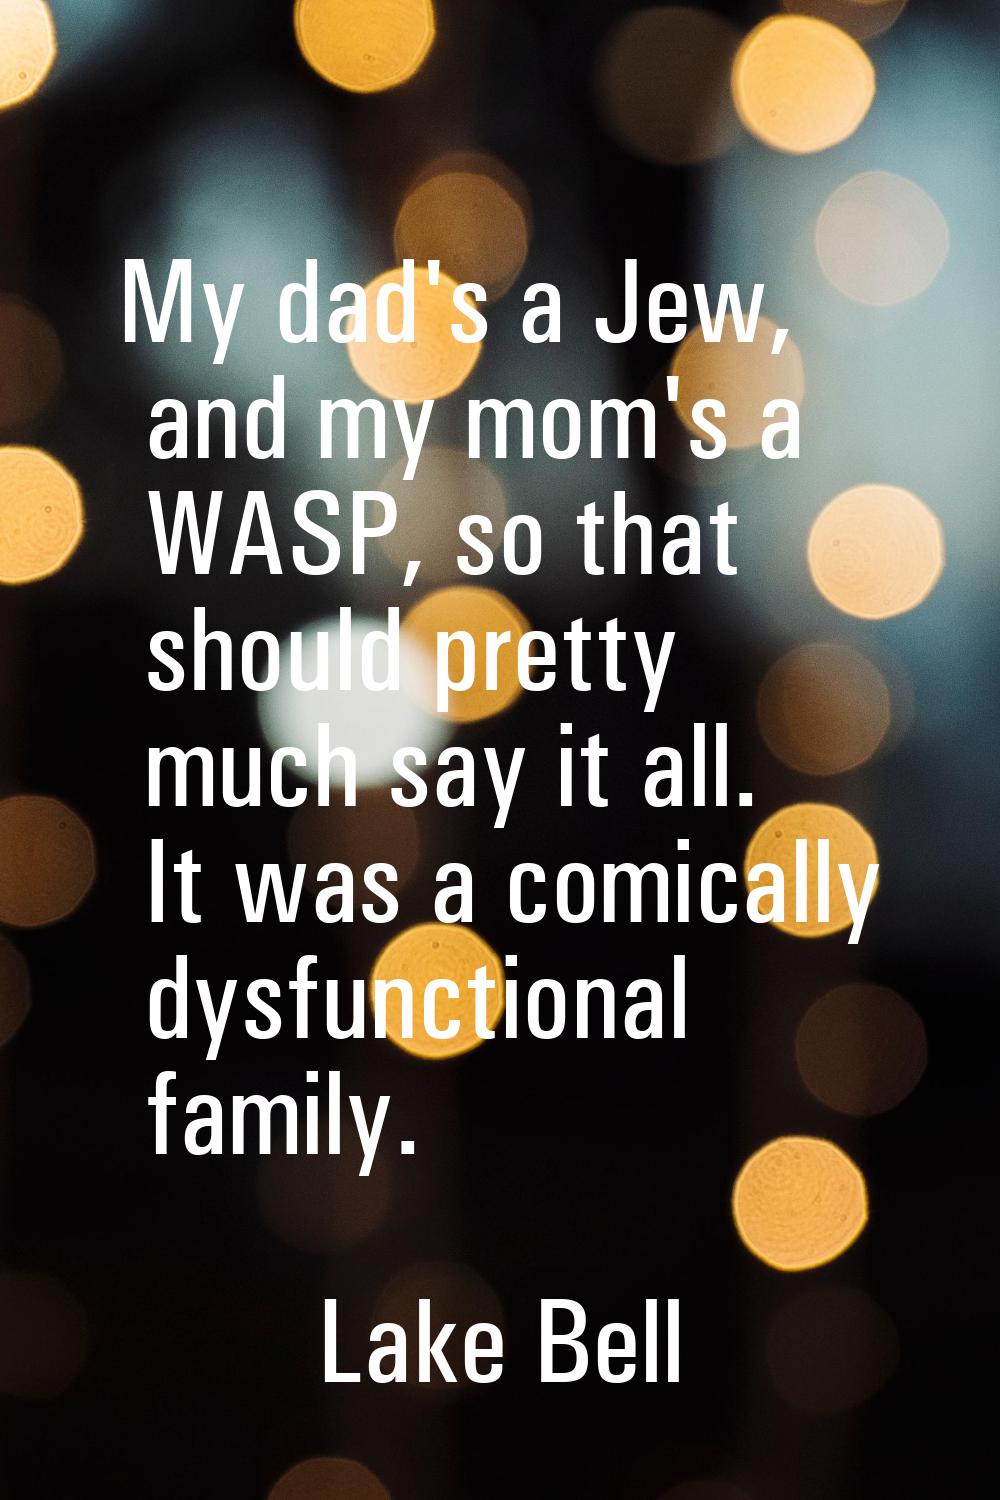 My dad's a Jew, and my mom's a WASP, so that should pretty much say it all. It was a comically dysf